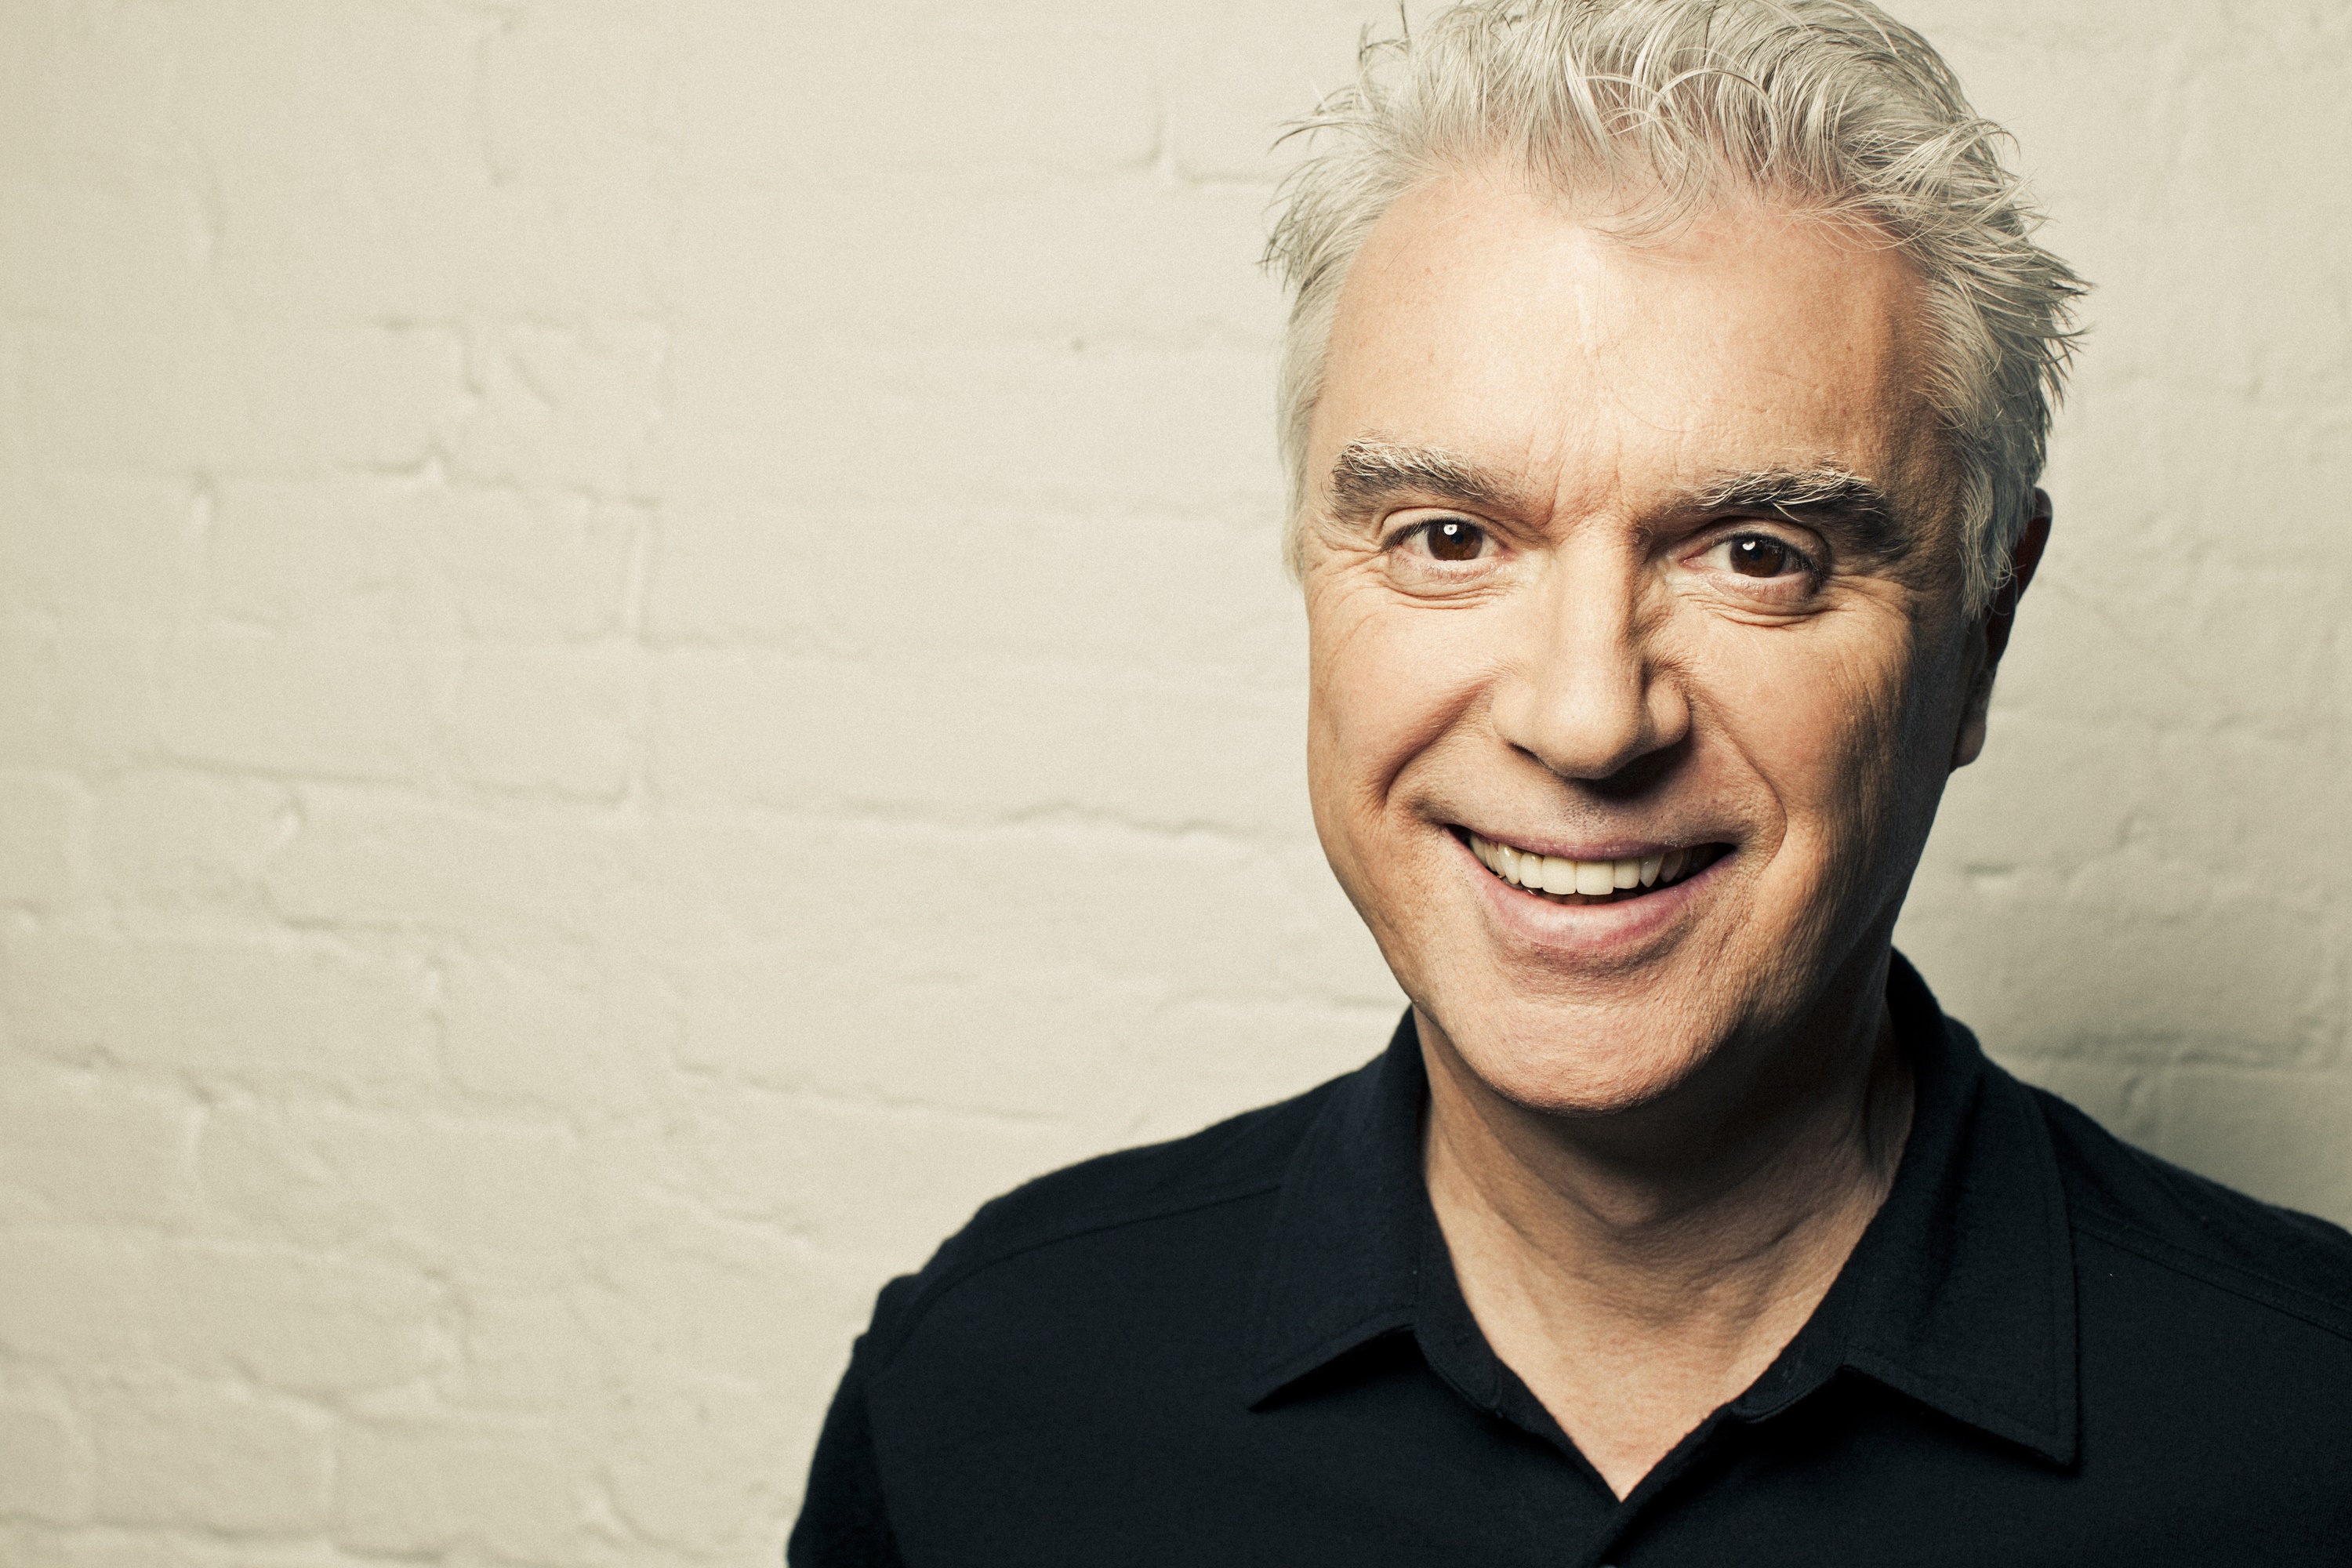 David Byrne launched a new virtual reality science project, titled Neurosociety